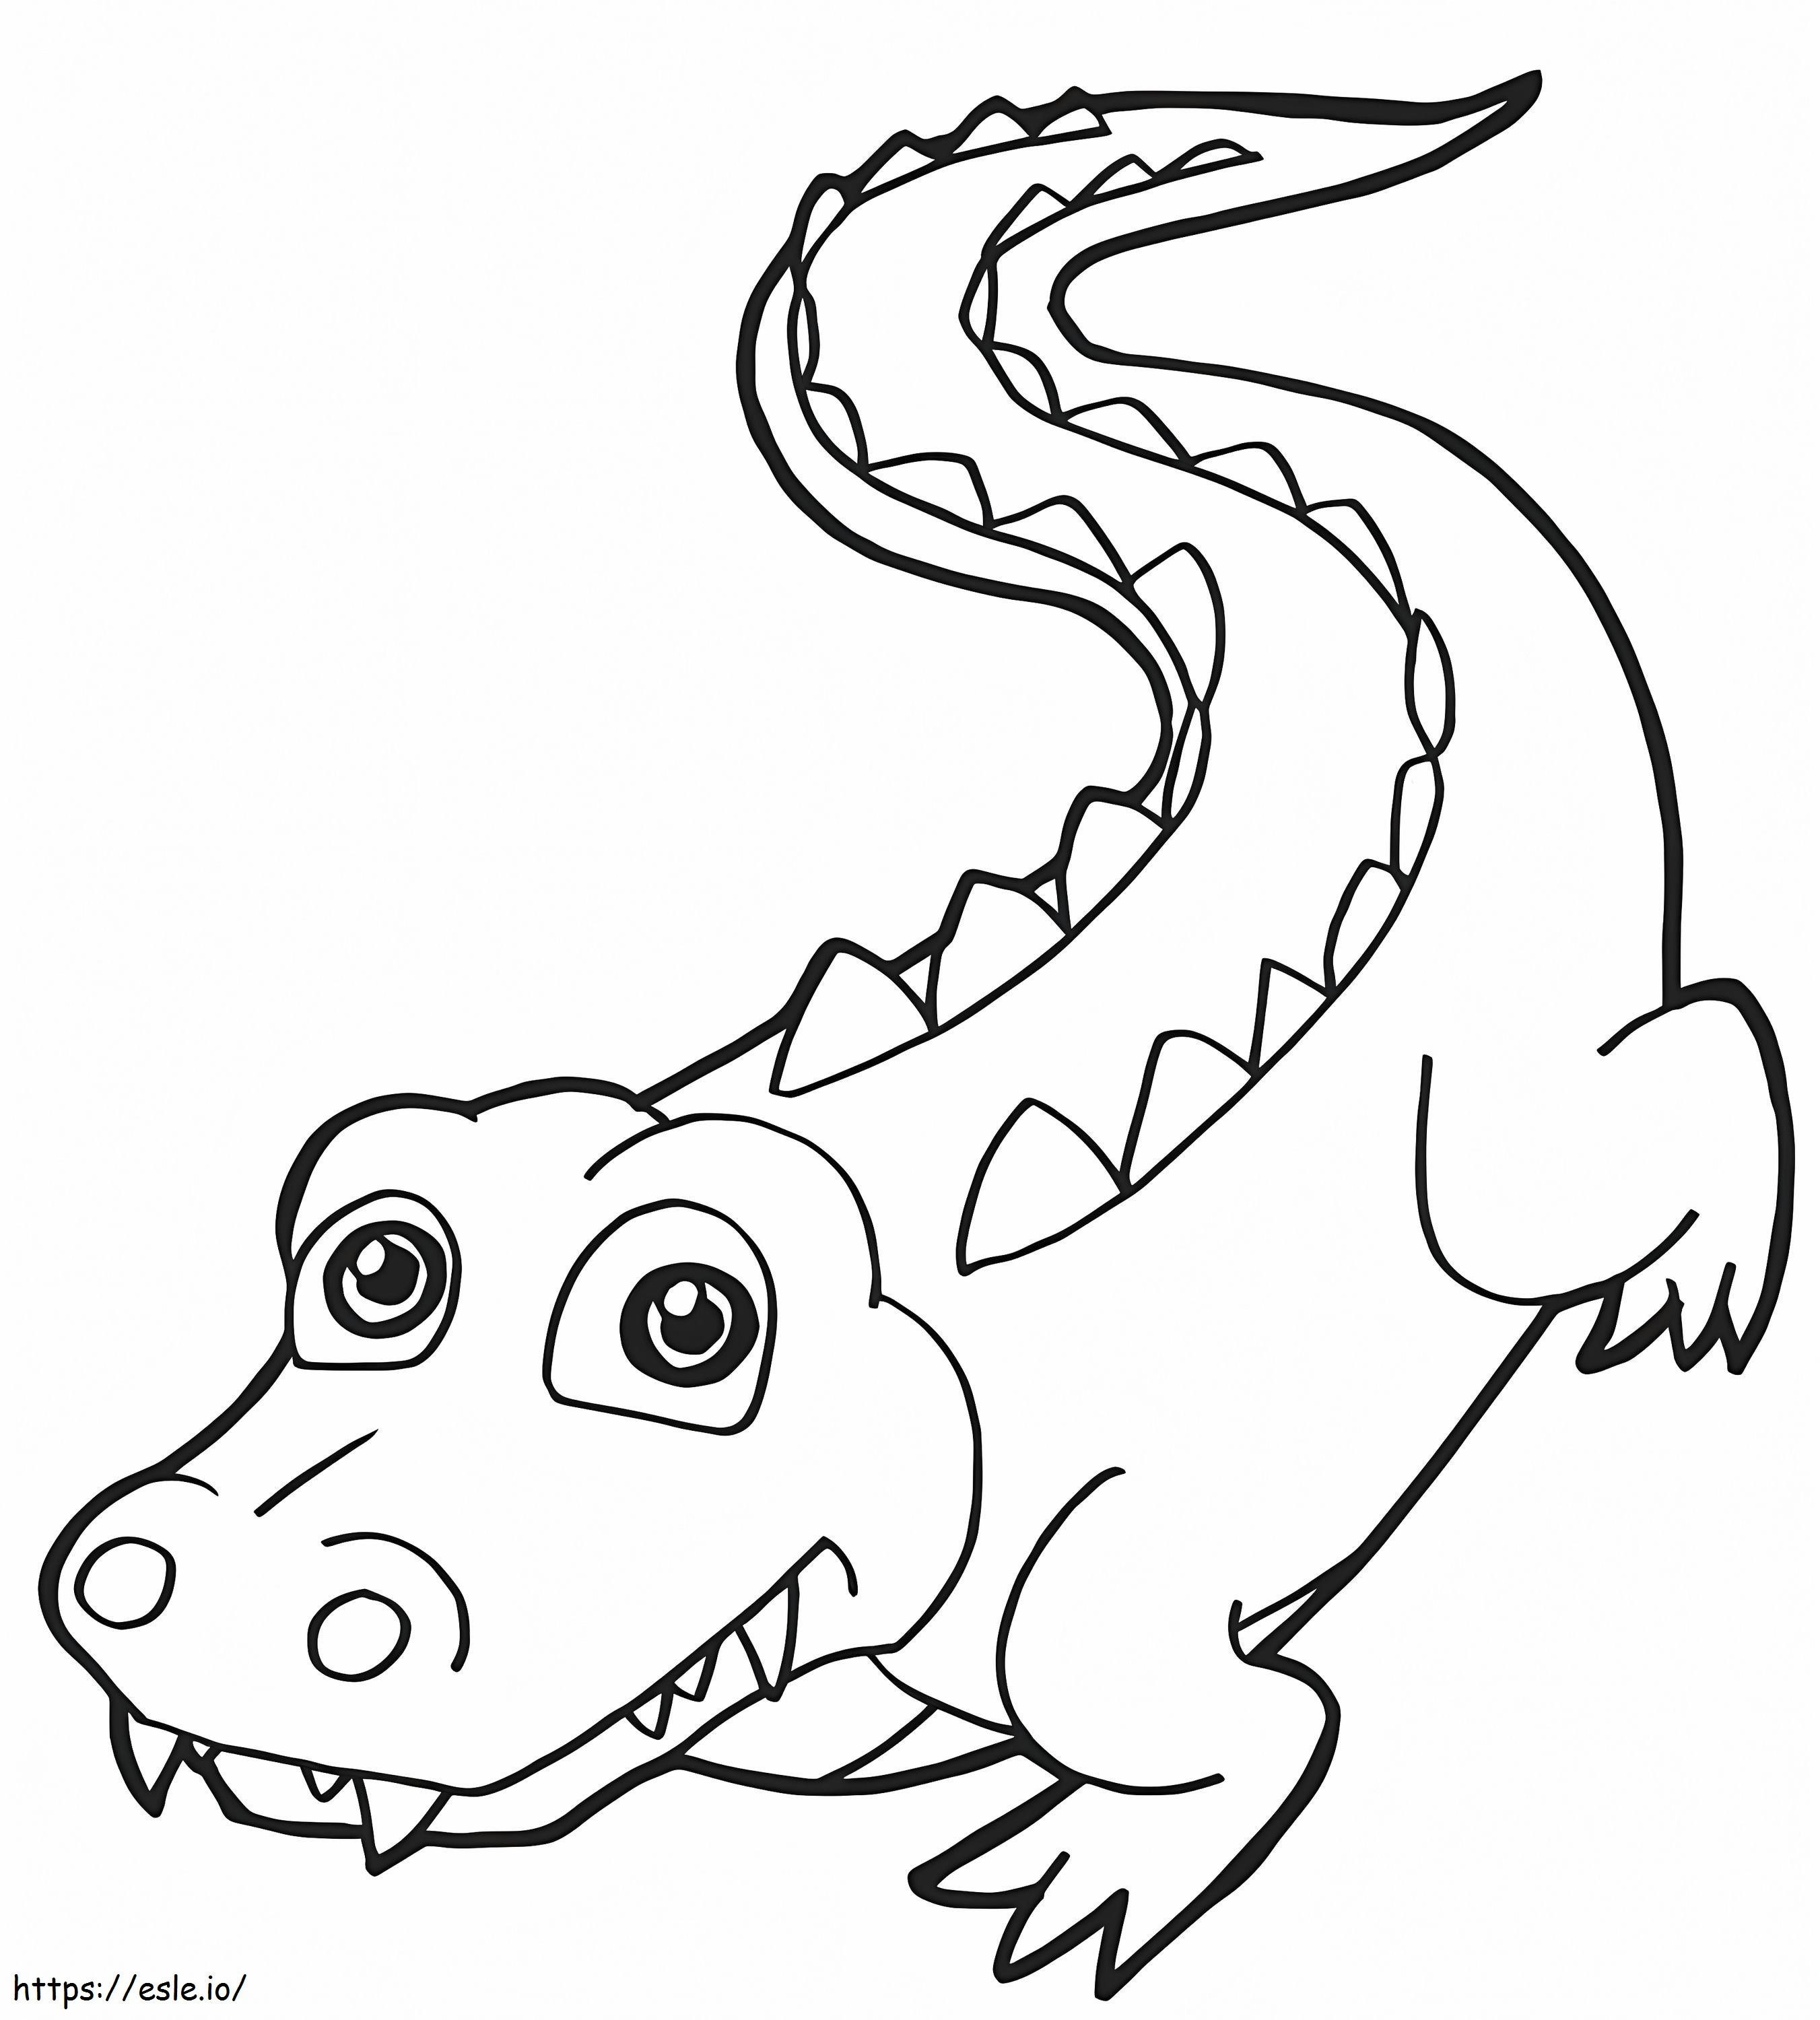 Crocodile For Kid coloring page